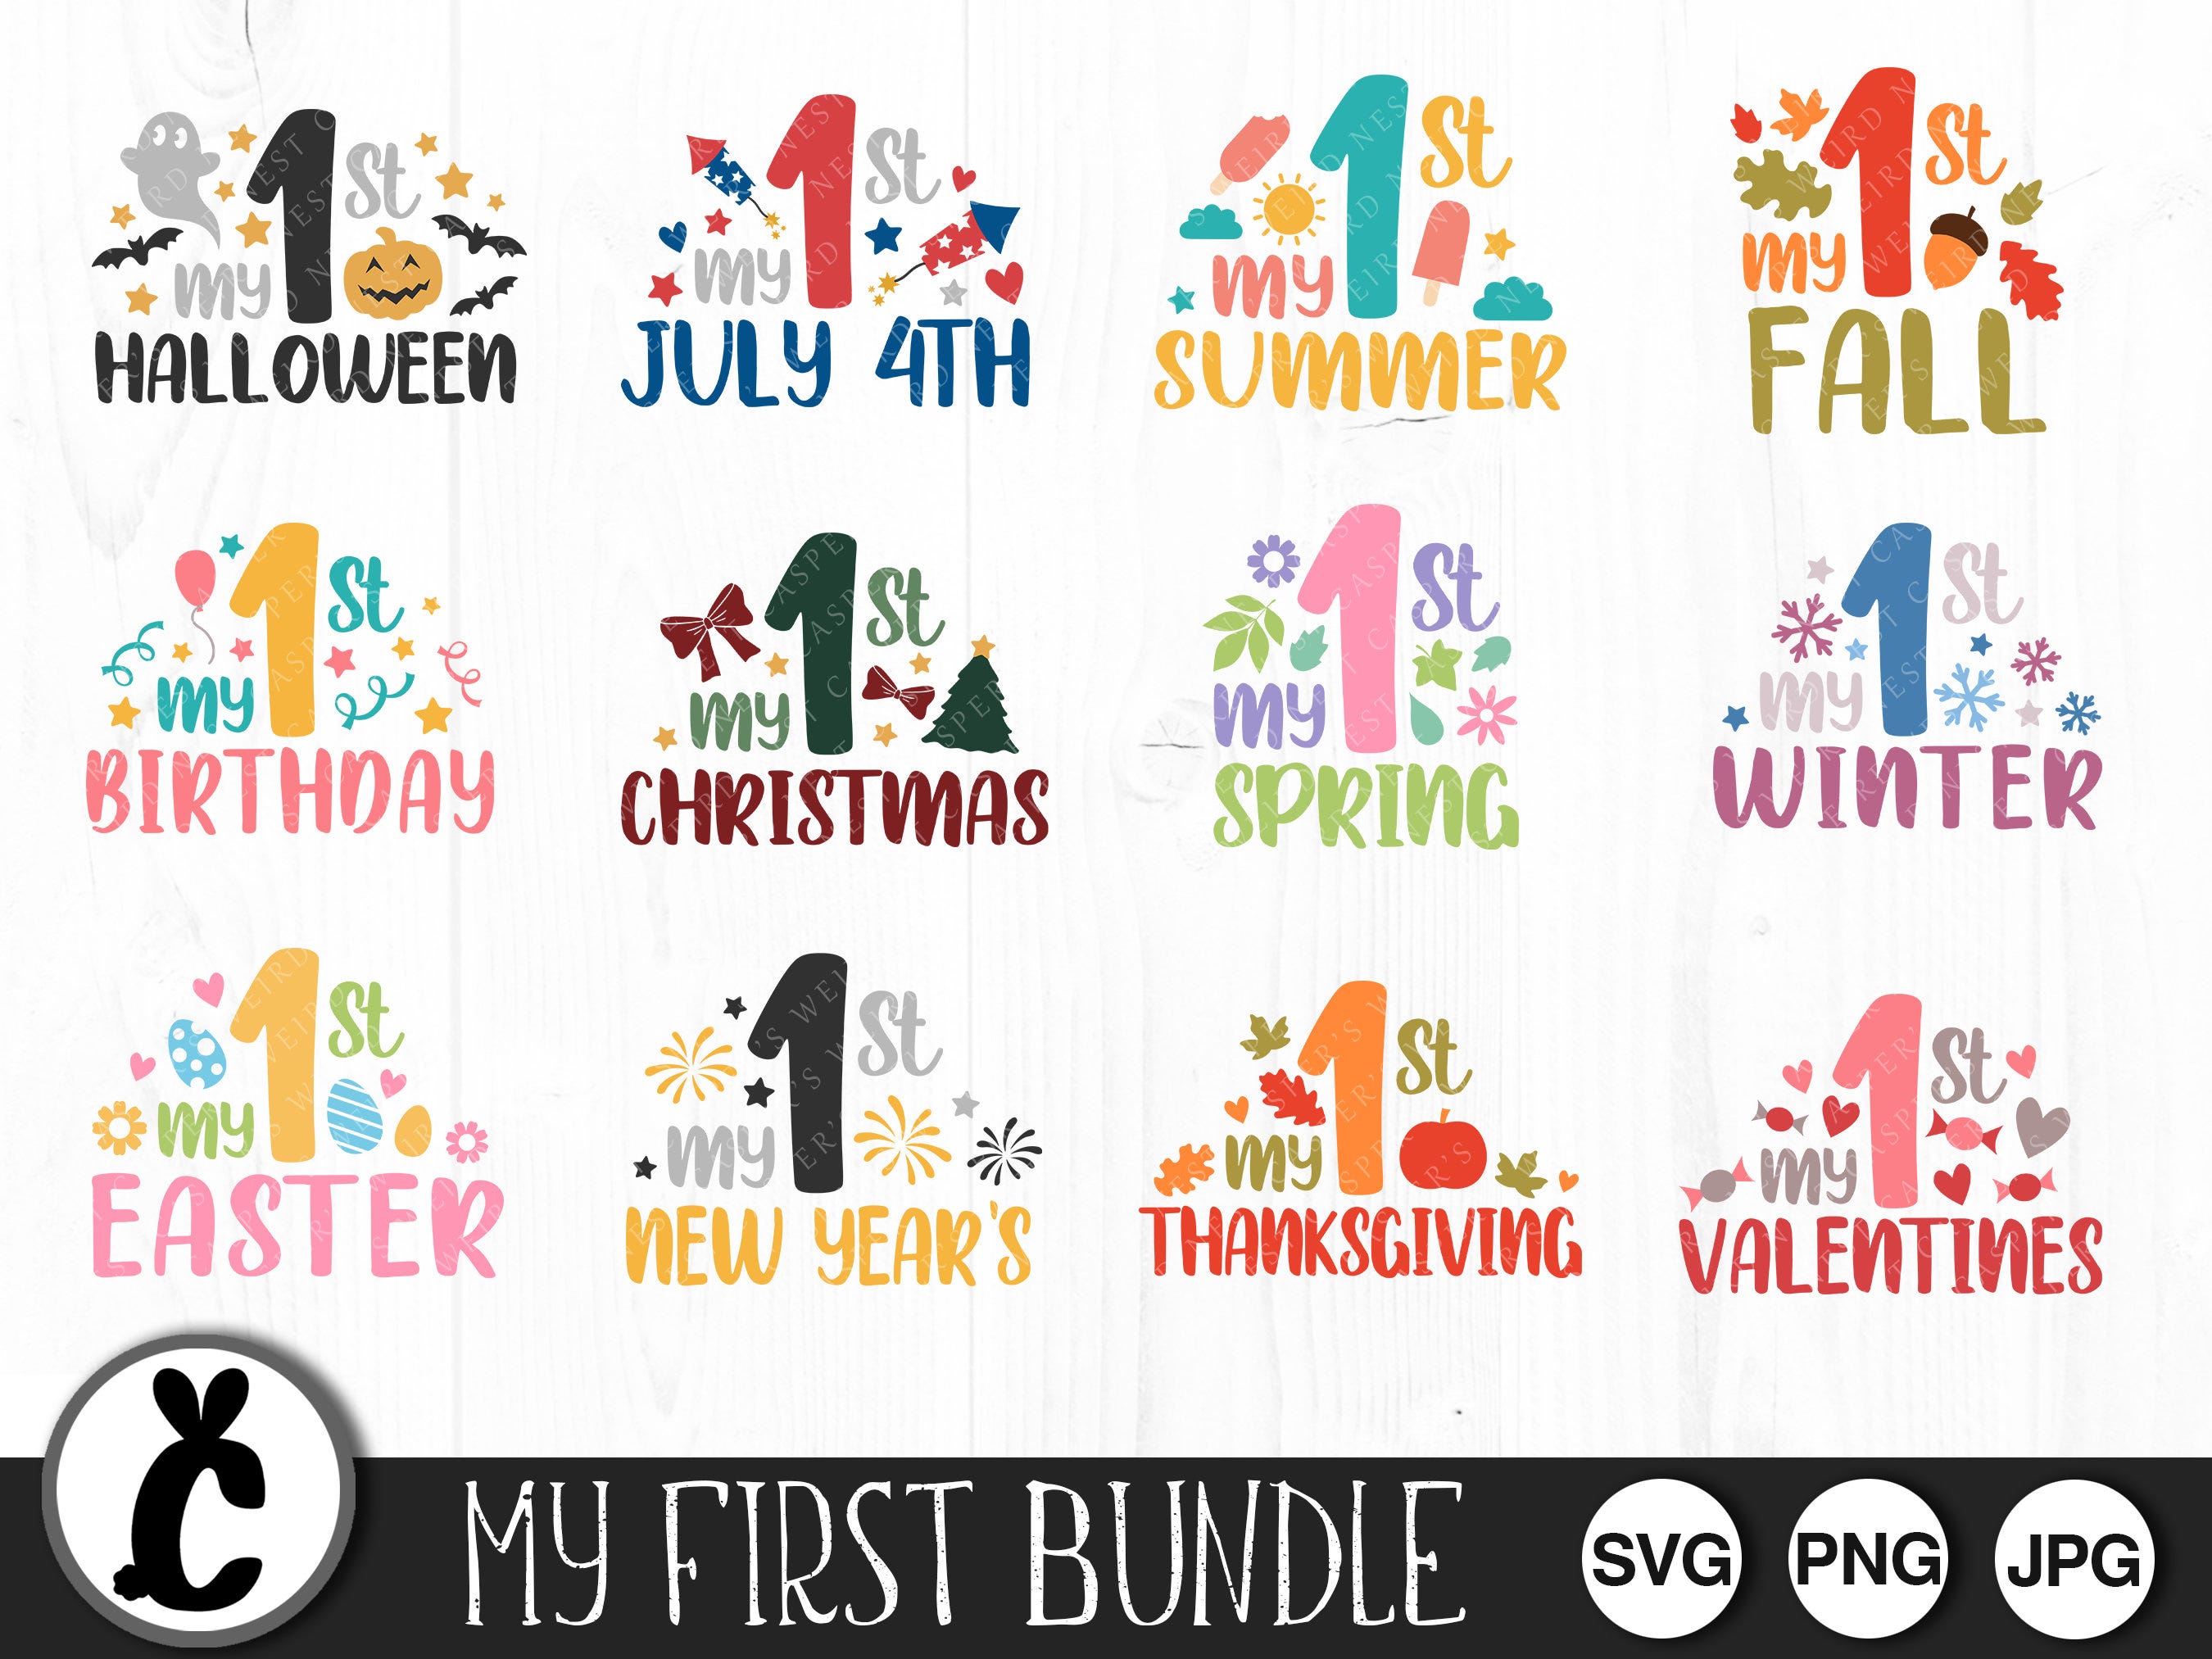 My First Bundle - SVG, PNG, JPG - Commercial Use, Digital Cut File, Digital Download, Instant Download, First Winter, First Spring, 1st Bday